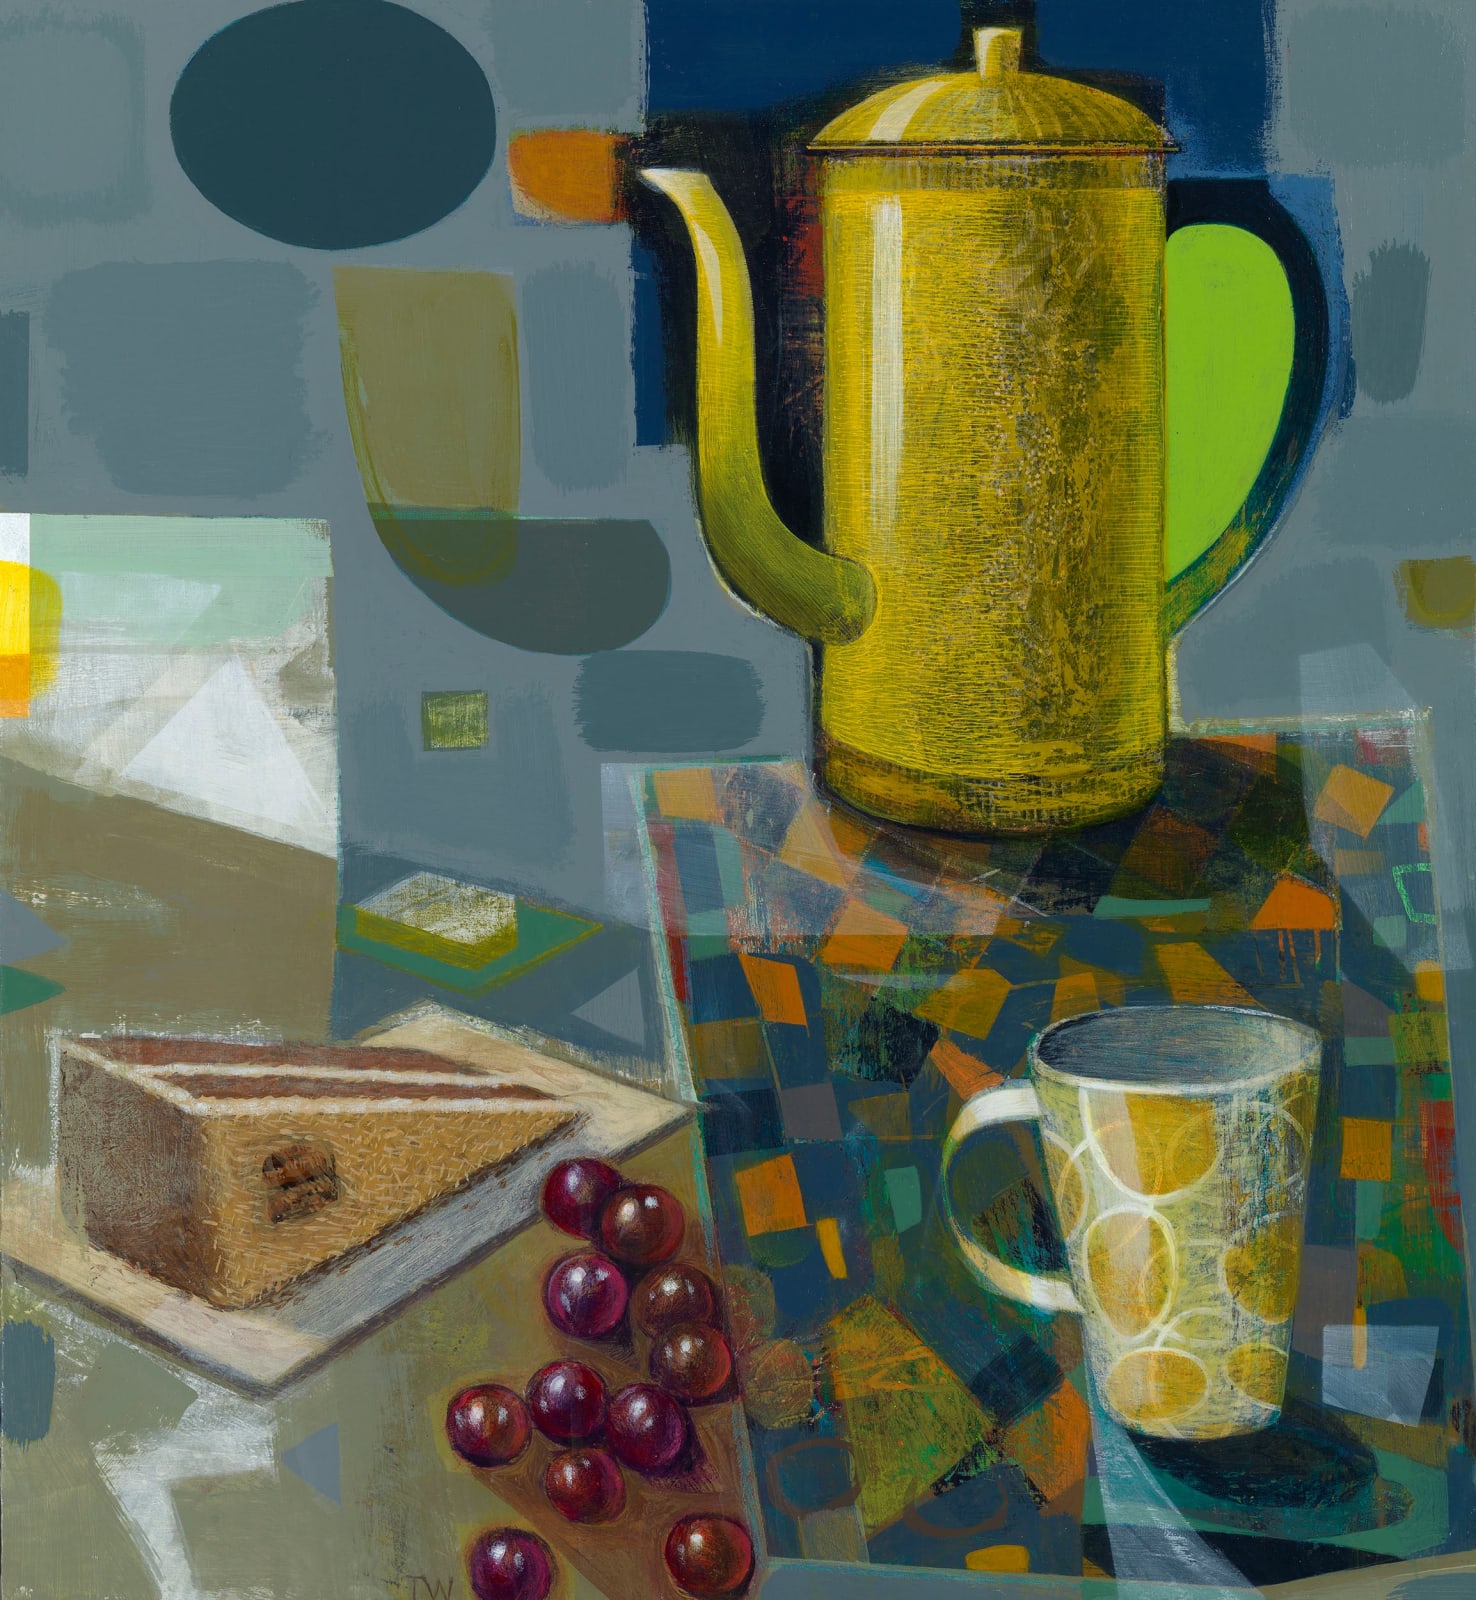 Tom Wood, Coffee and Cake, The Yellow Pot, 2022